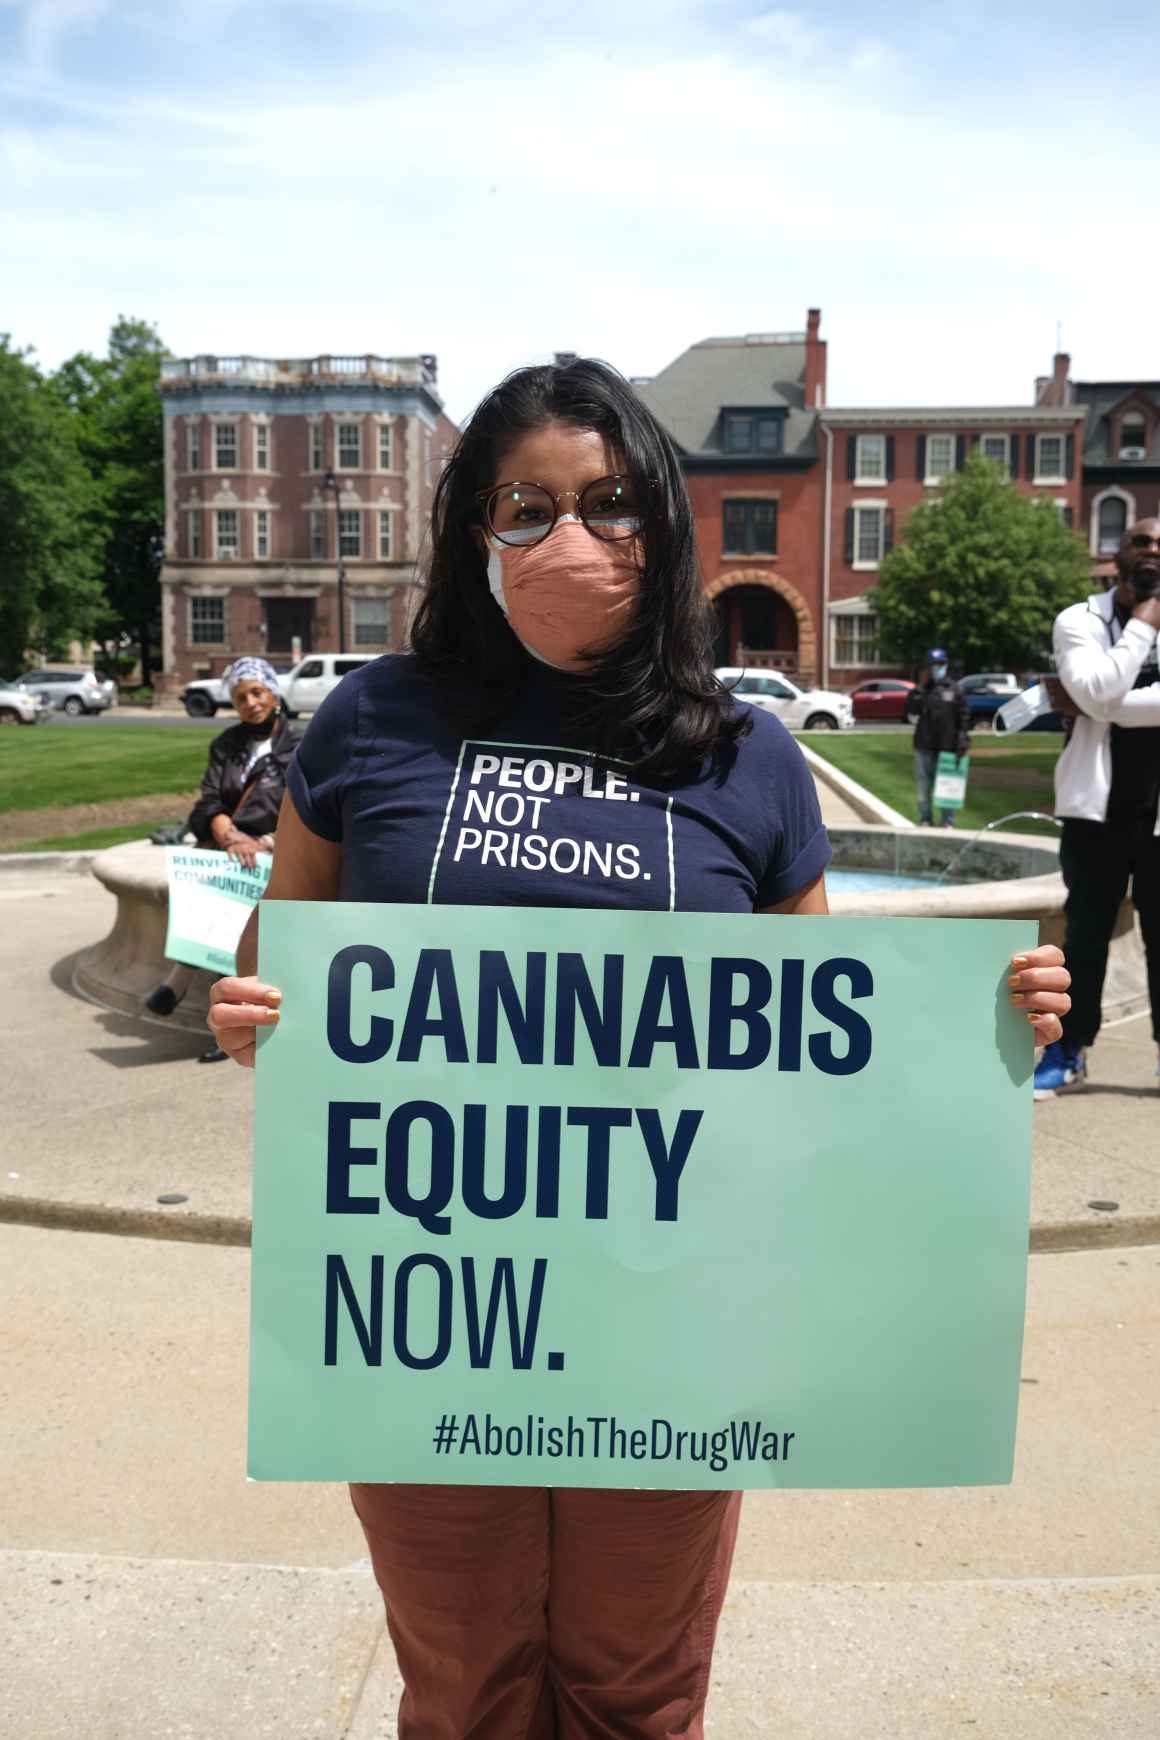 Woman holding sign that says "Cannabis Equity Now"